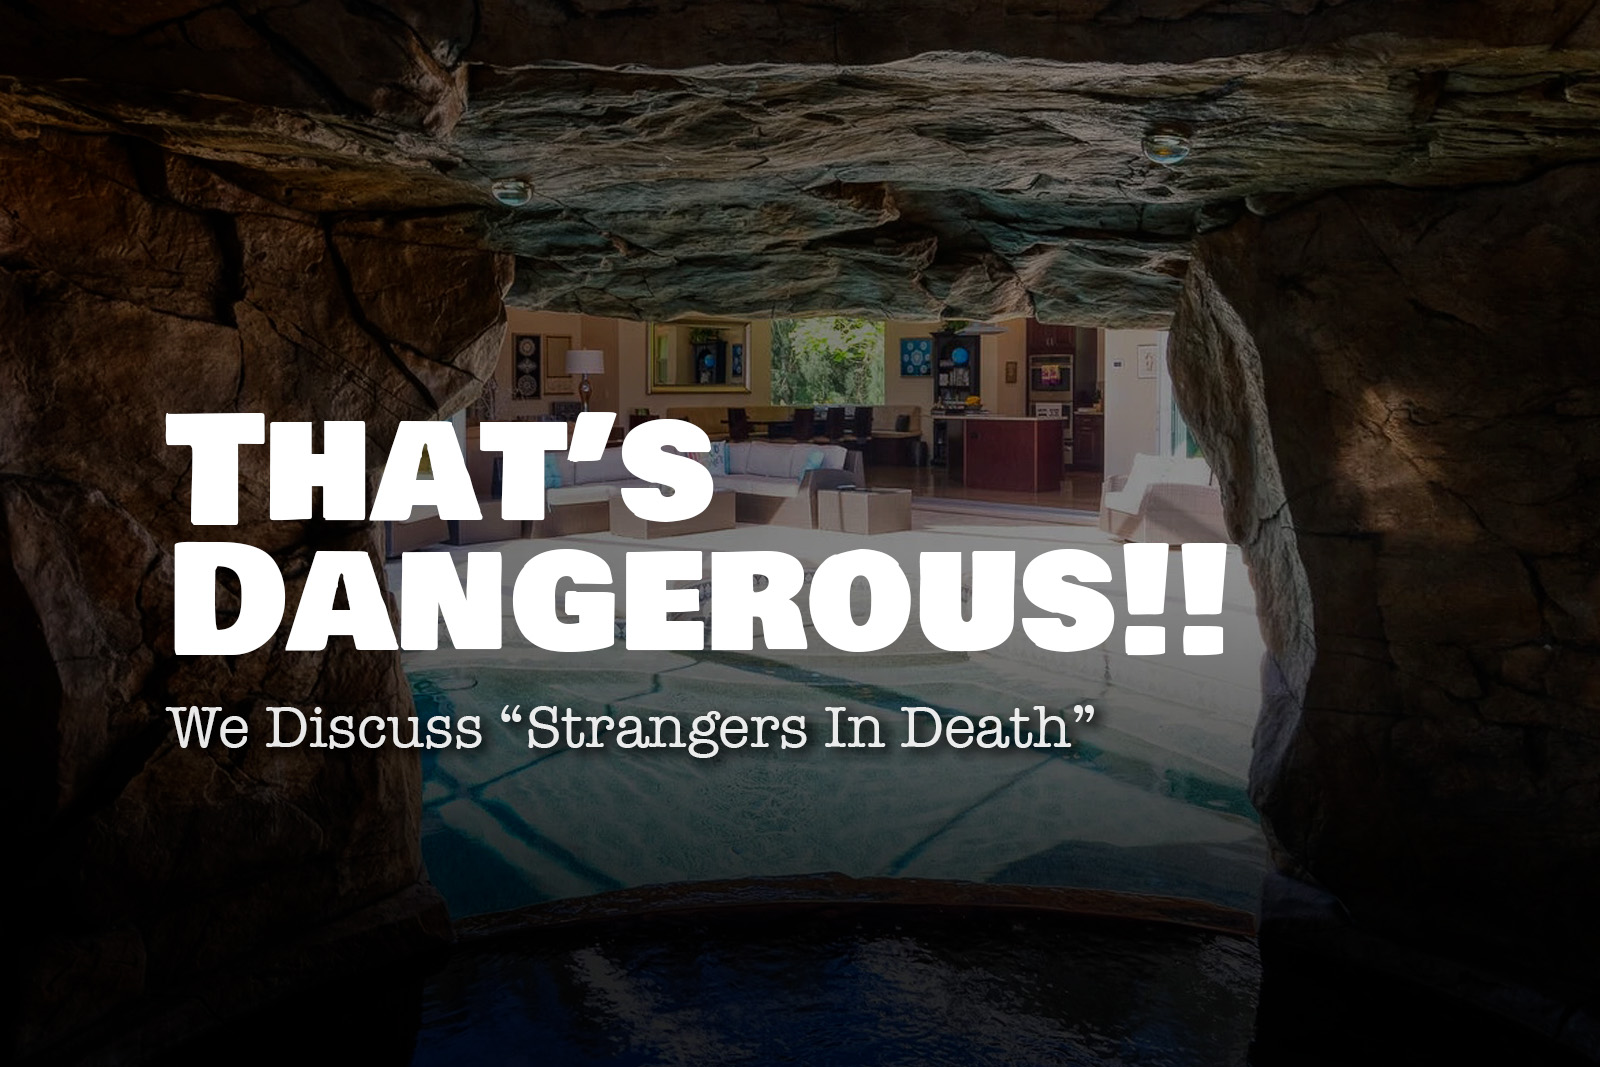 That’s Dangerous!! We Review “Strangers in Death” by J.D. Robb